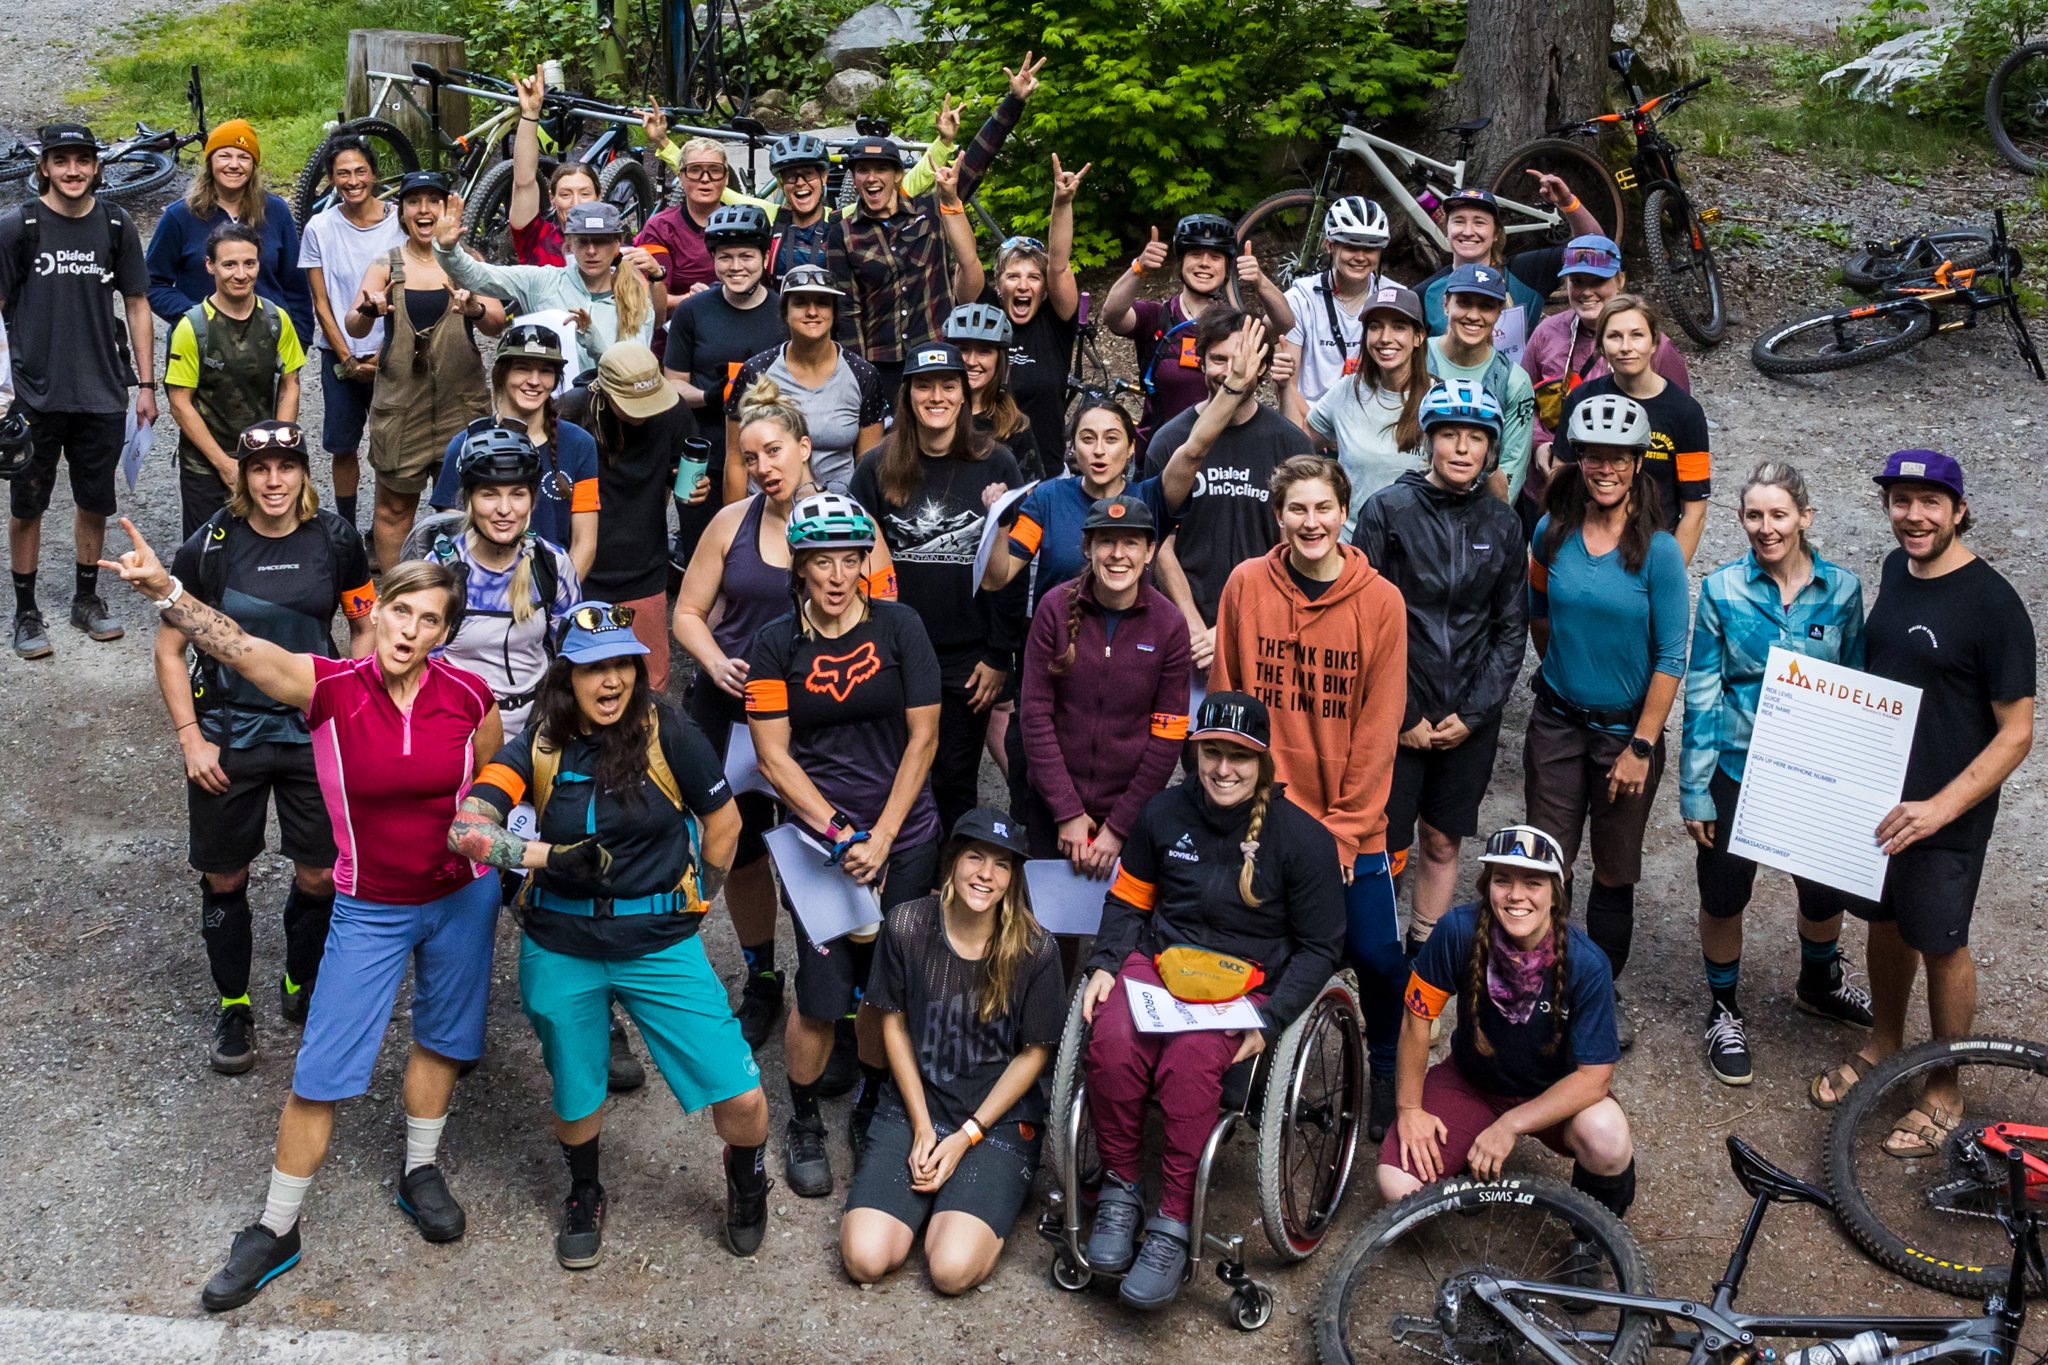  An amazing team of organizers, ride leaders and staff helped make the event a success.  